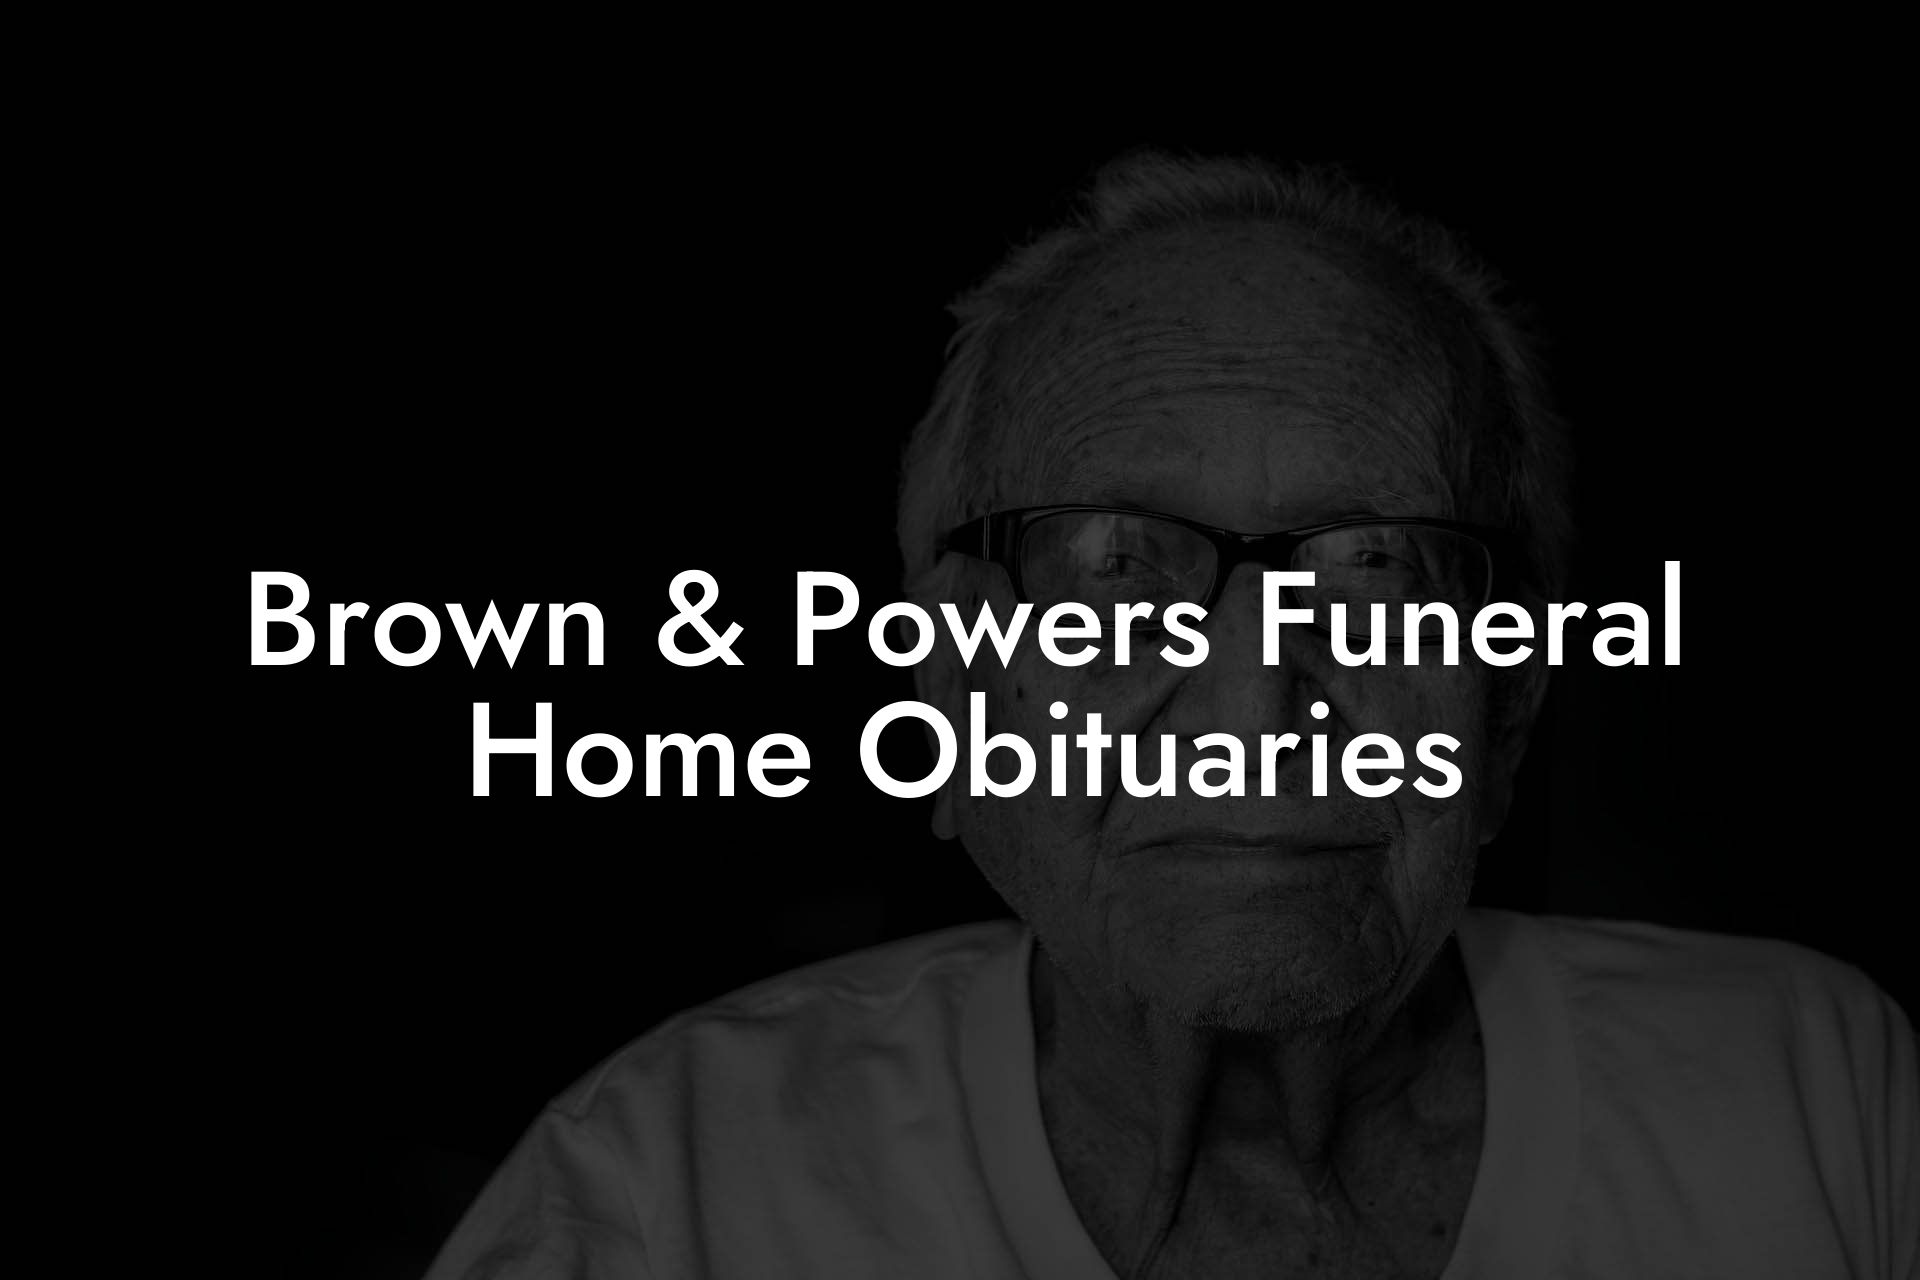 Brown & Powers Funeral Home Obituaries